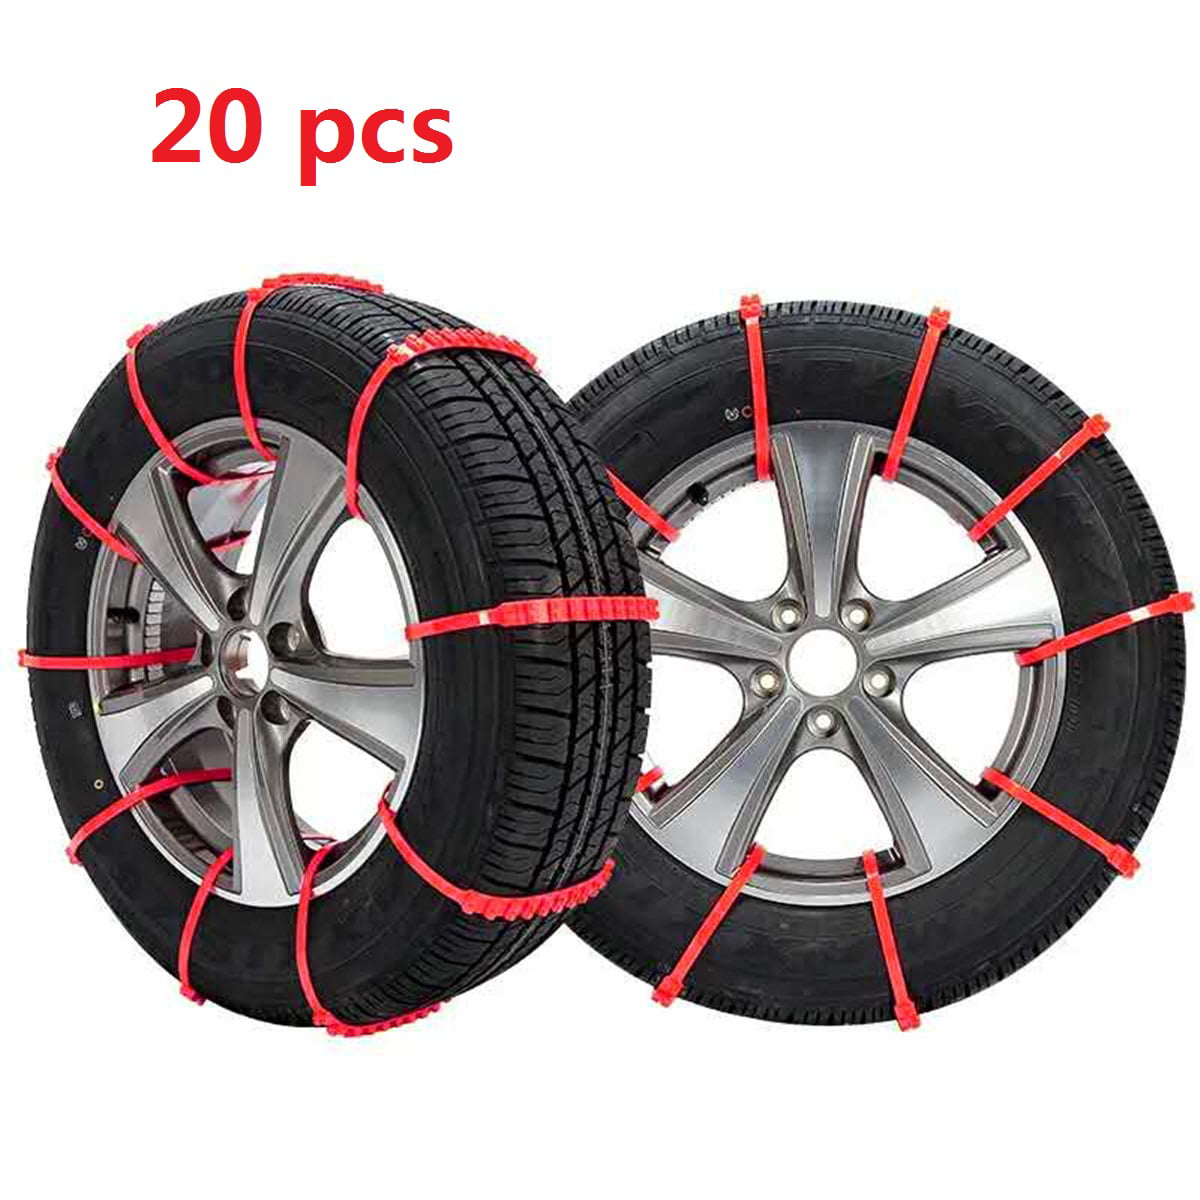 10Pcs Snow Tire Chain Anti-Slip Chains Adjustable Nylon Zip-Tie Track Claws Emergency Straps Durable and Stable Noise Reduction Mute Orange 